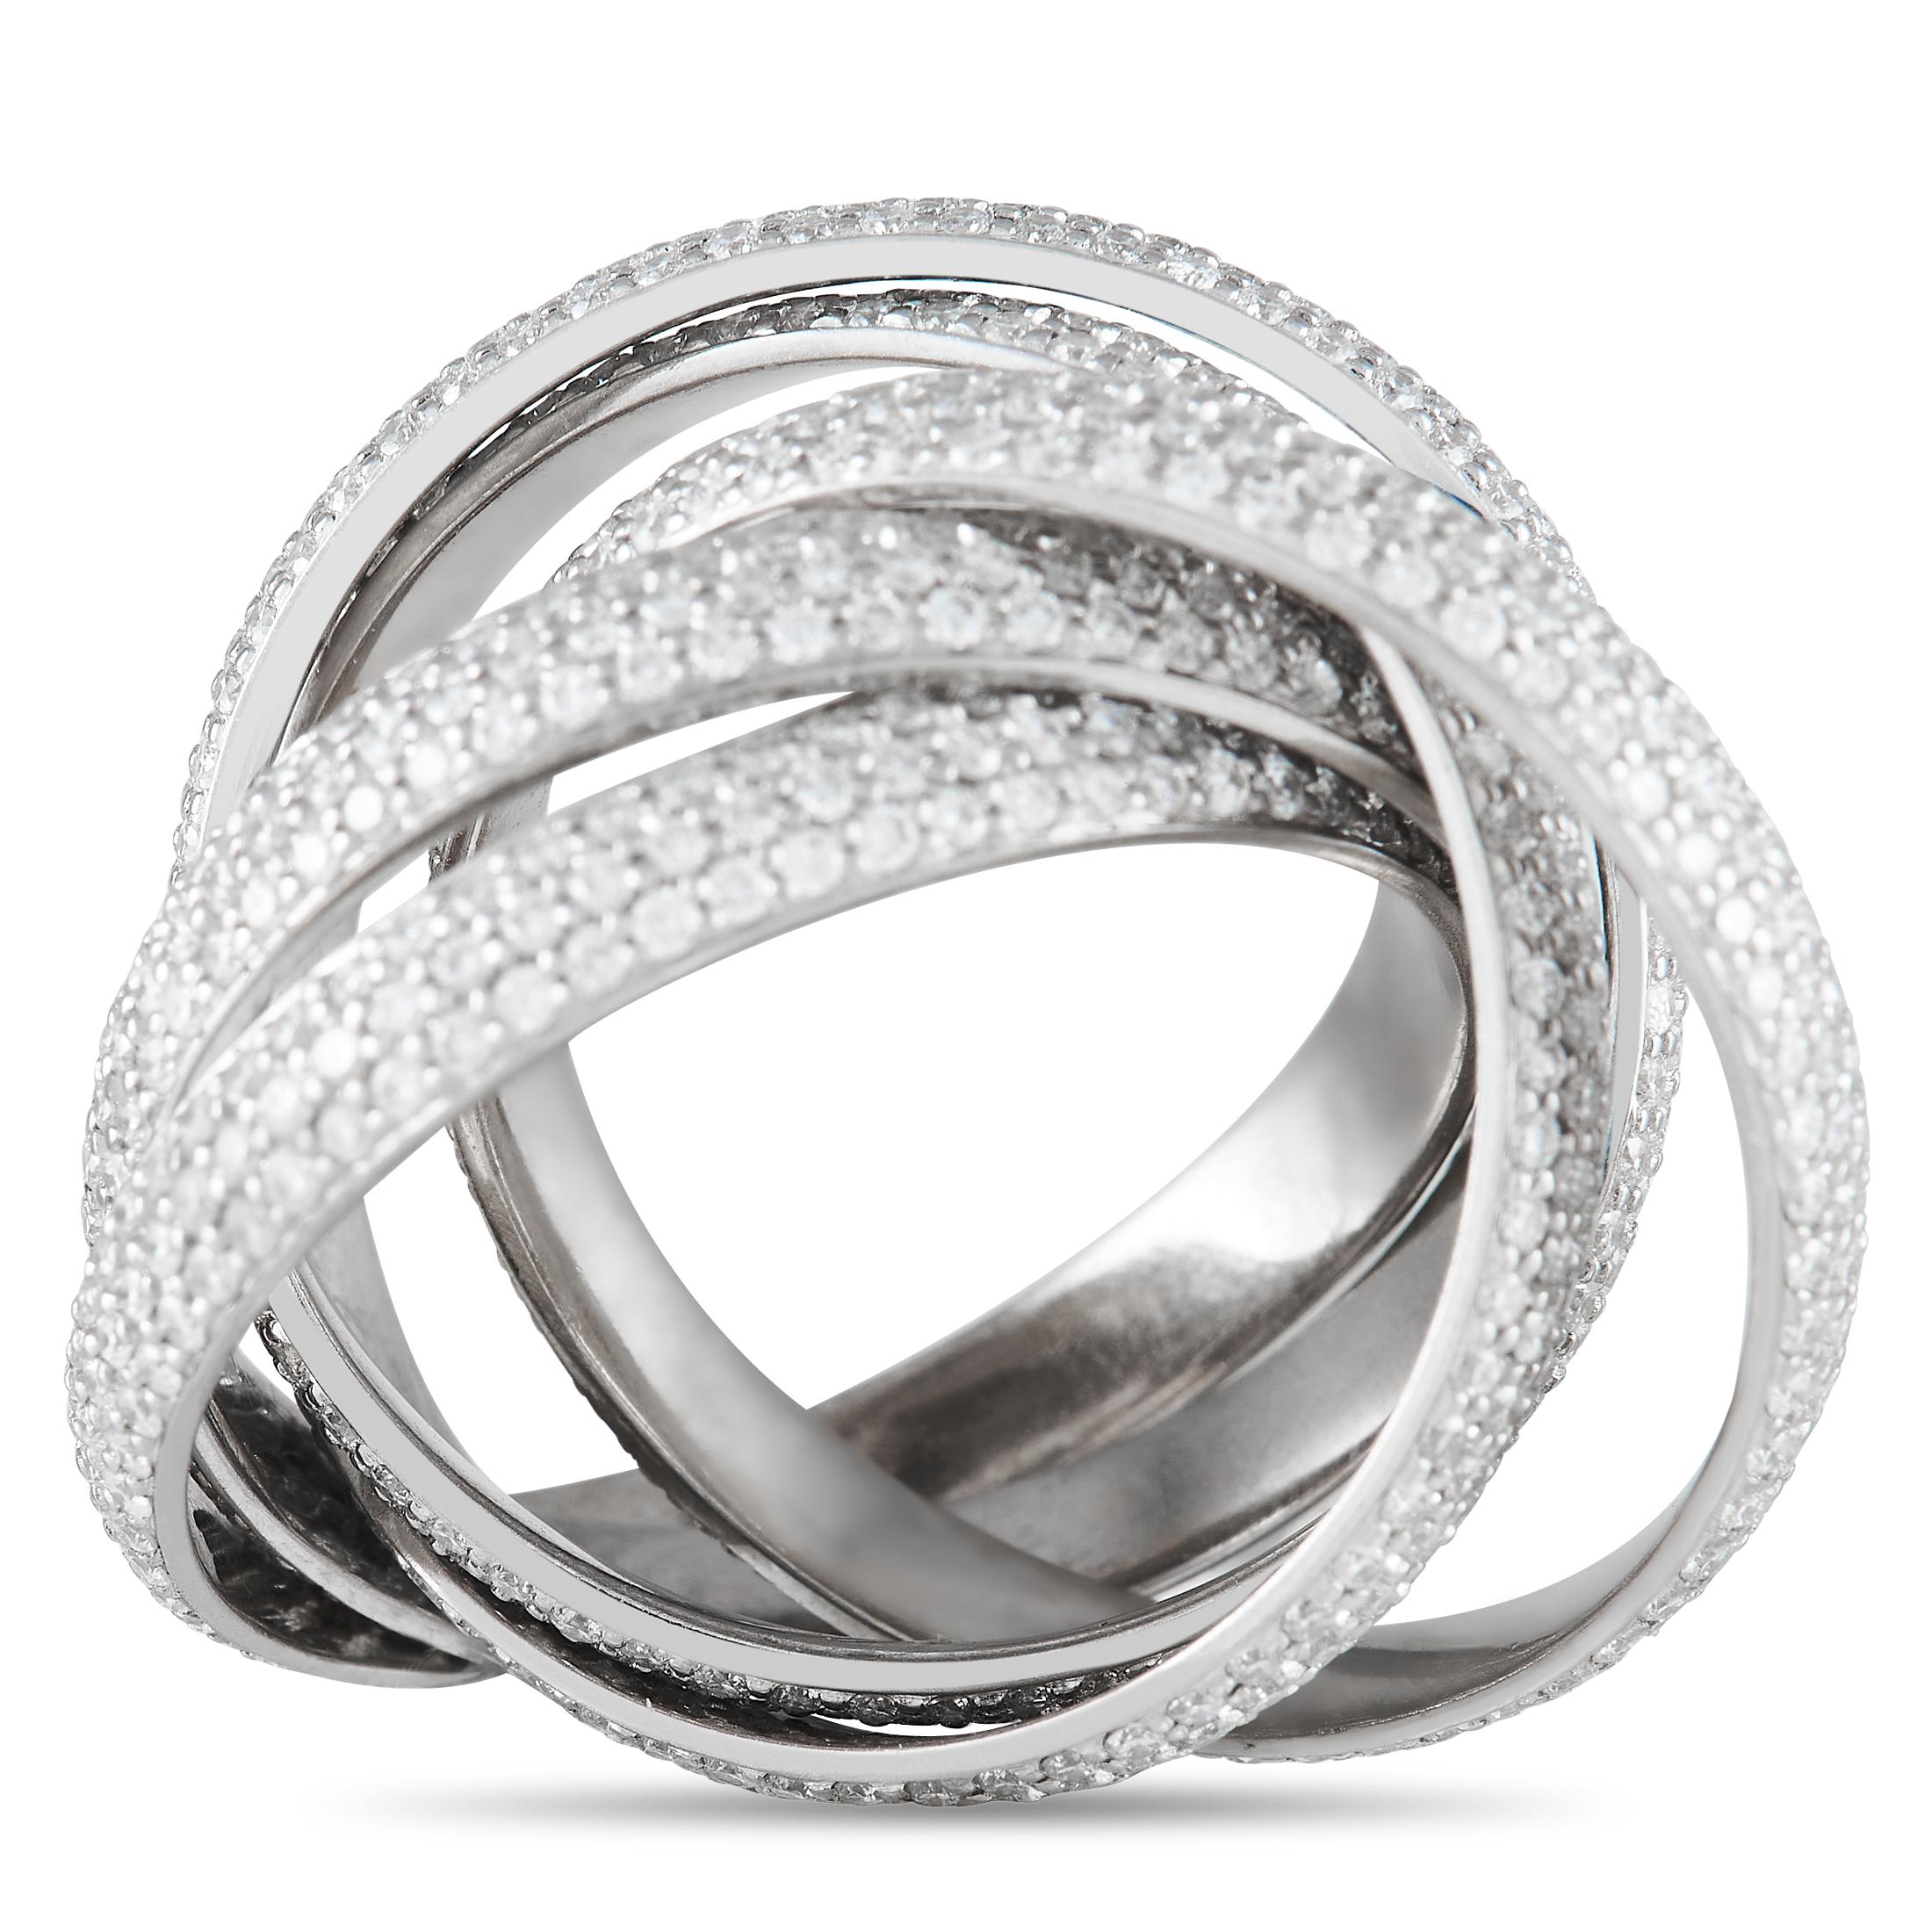 Finely crafted in 18K white gold is this charming ring from Paloma Piccaso's Melody Collection. This sophisticated Tiffany & Co piece features five interlocking bands, with each band traced by rows of round brilliant diamonds. The ring is a